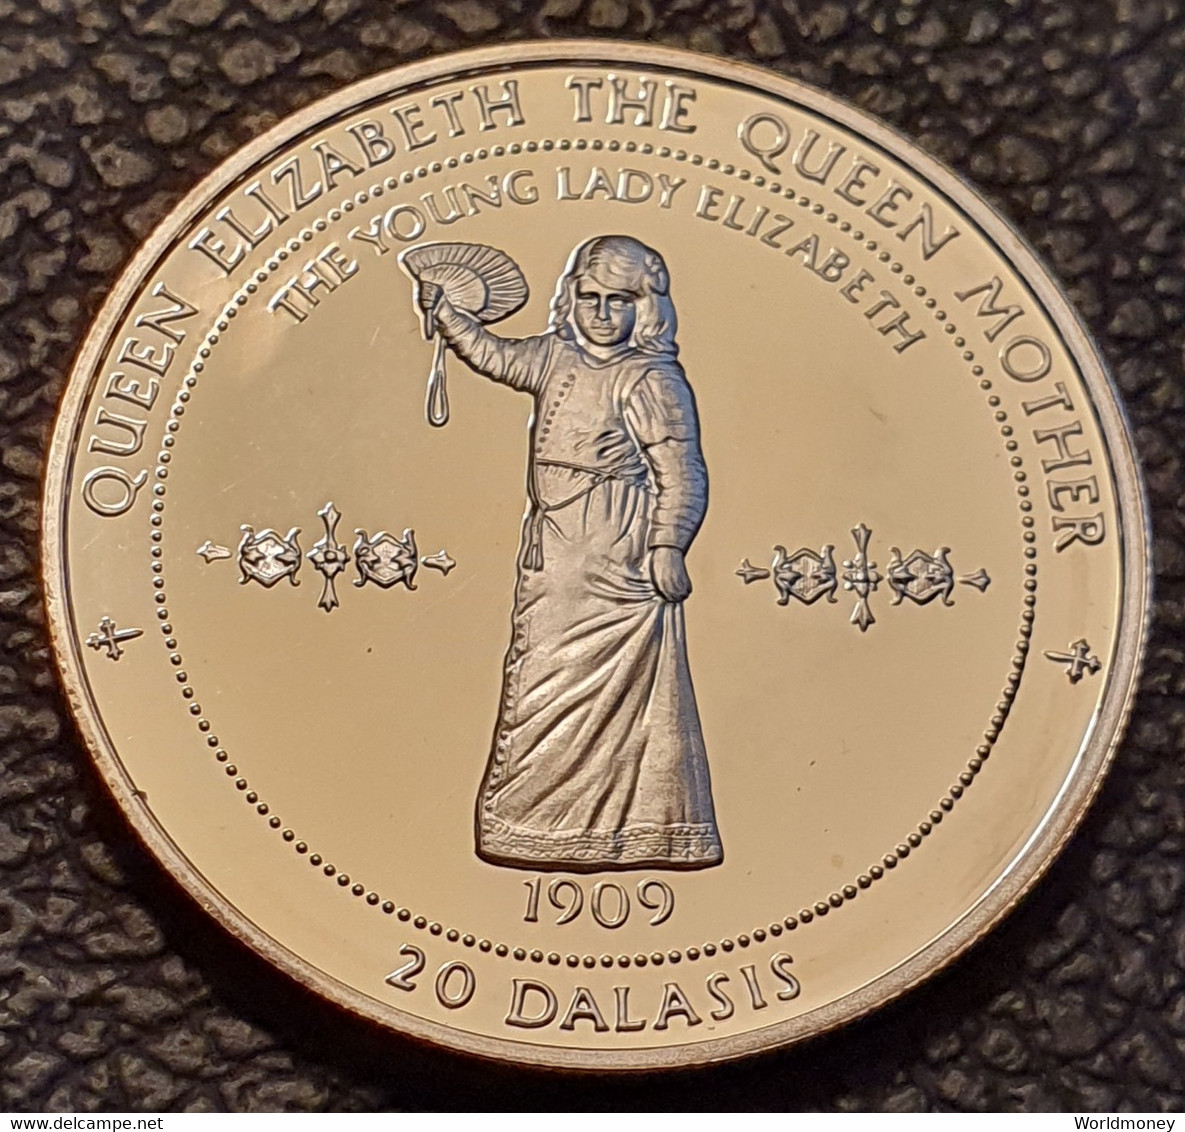 Gambia 20 Dalasis 1996 (PROOF) "The Young Lady Elizabeth" Silver - Gambie